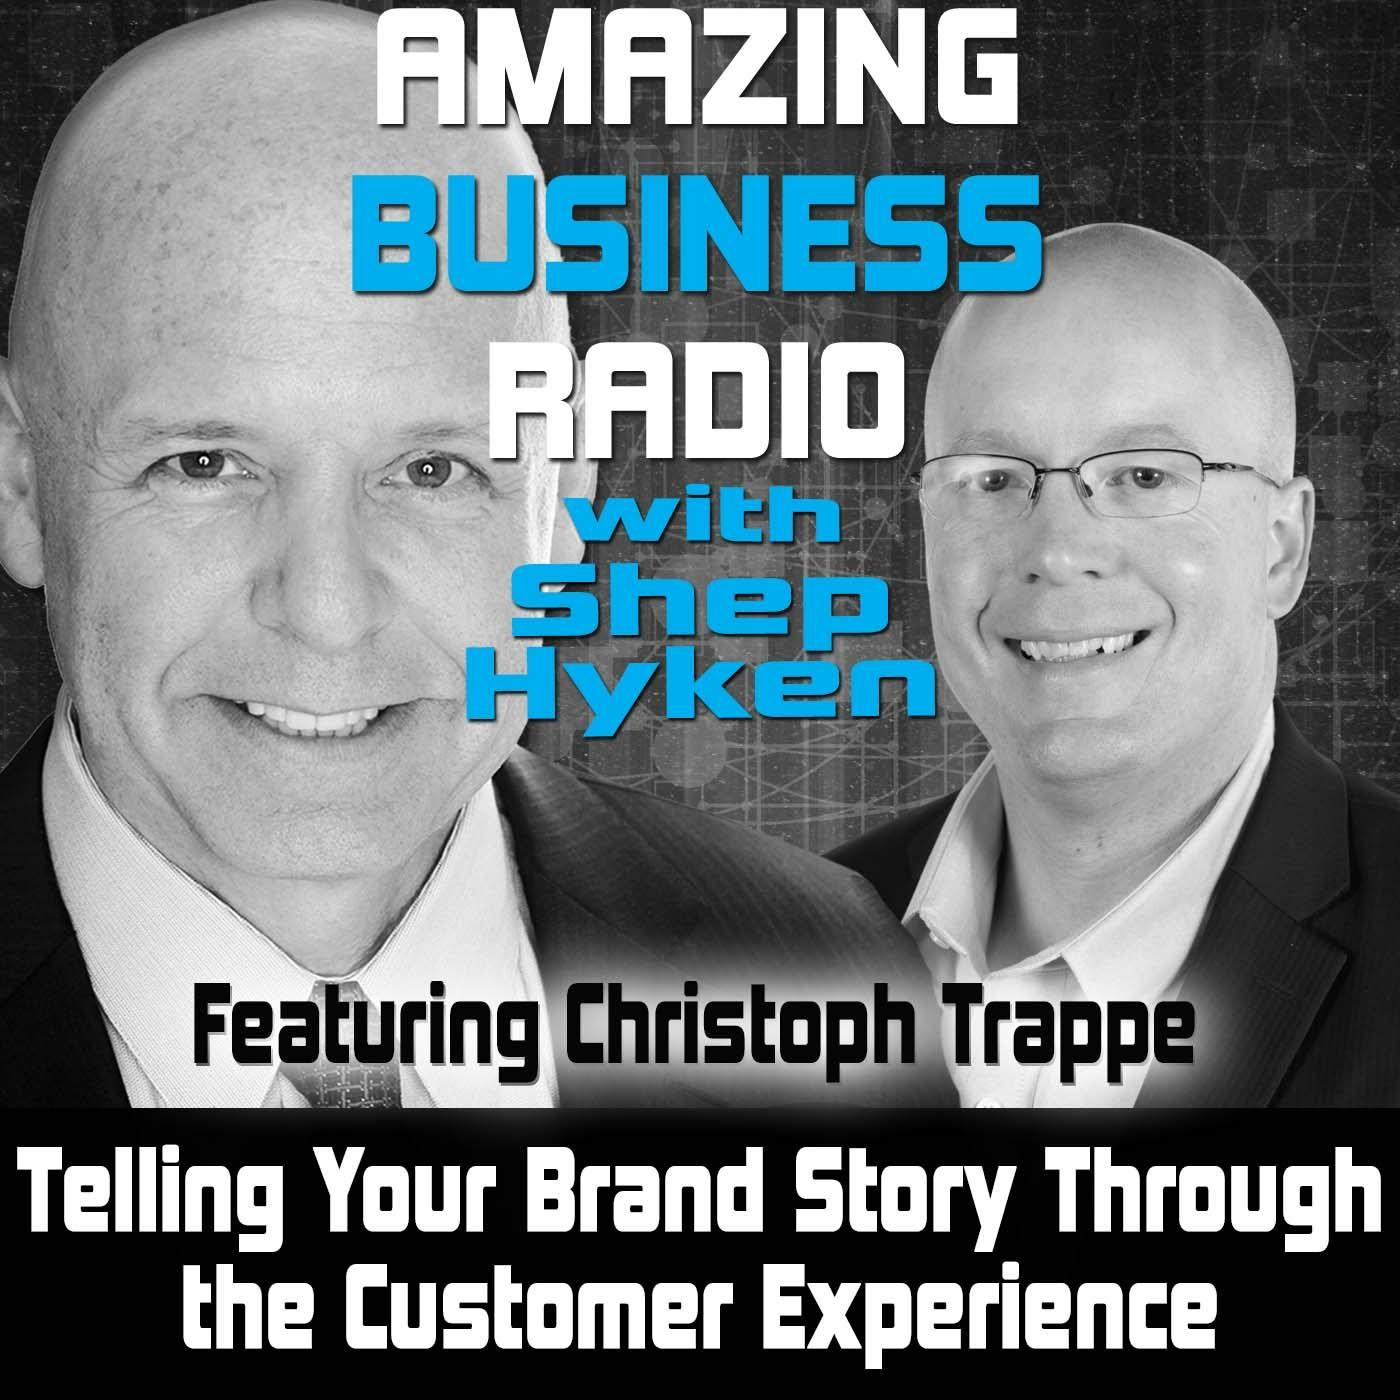 Telling Your Brand Story Through the Customer Experience Featuring Christoph Trappe